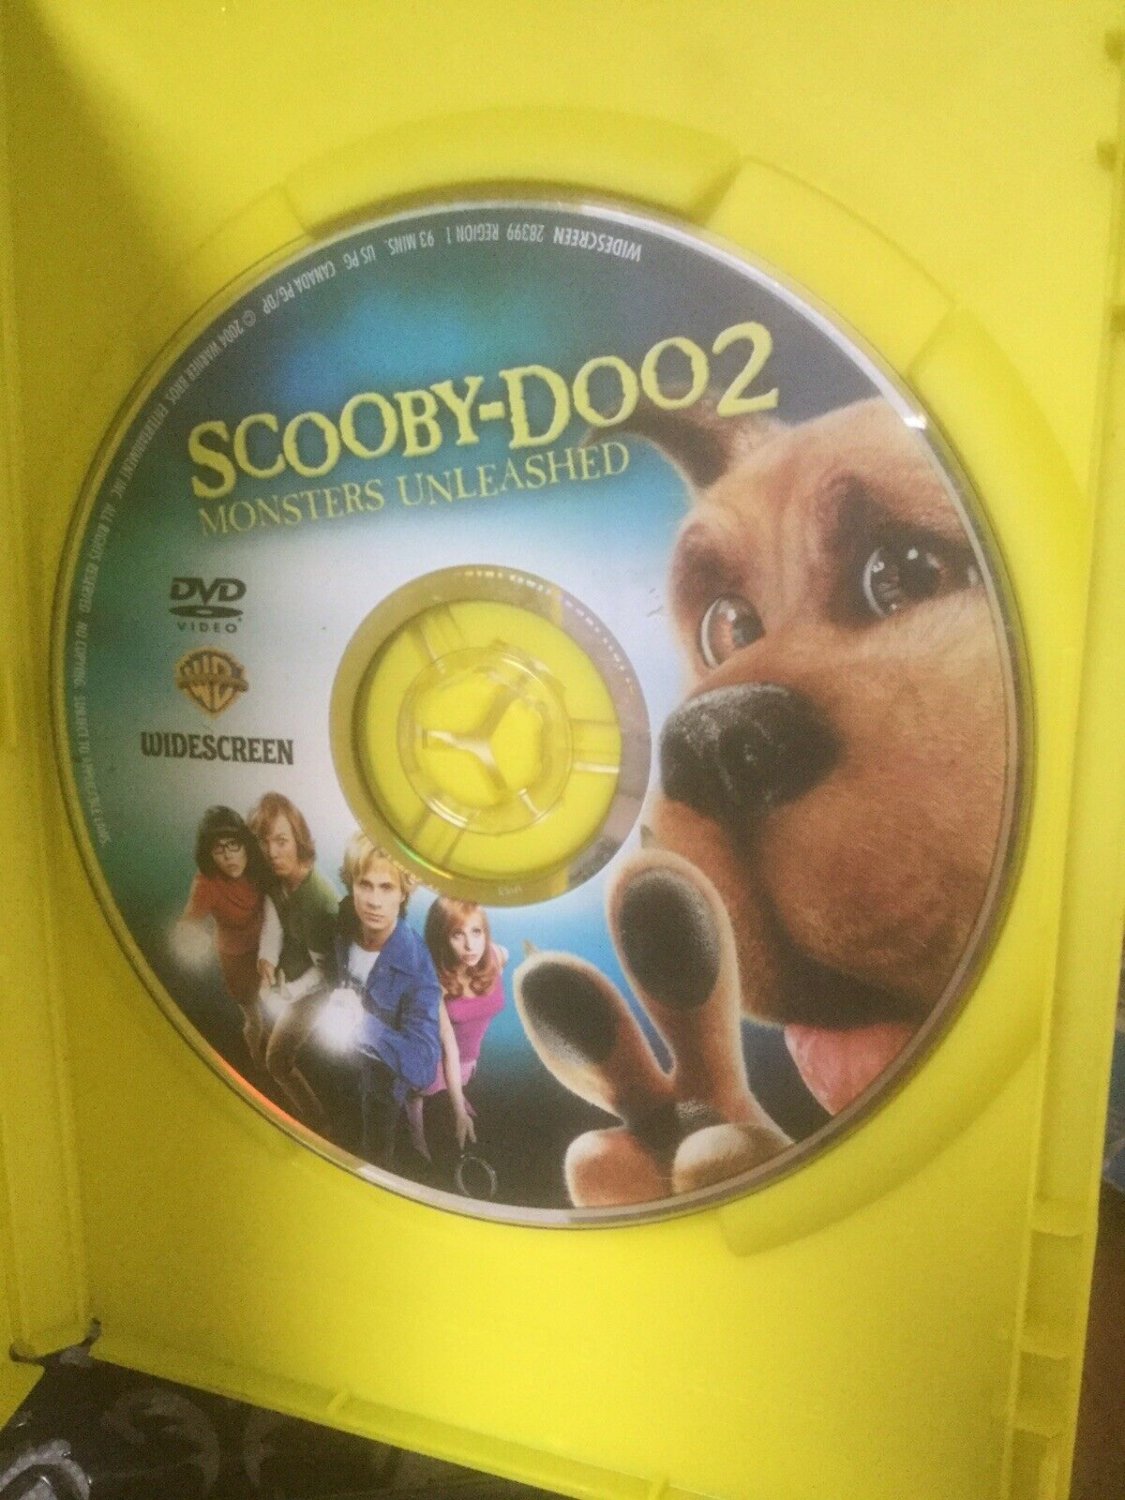 Scooby Doo 2 Monsters Unleashed Dvd2004widescreen Very Good With Insert 7859